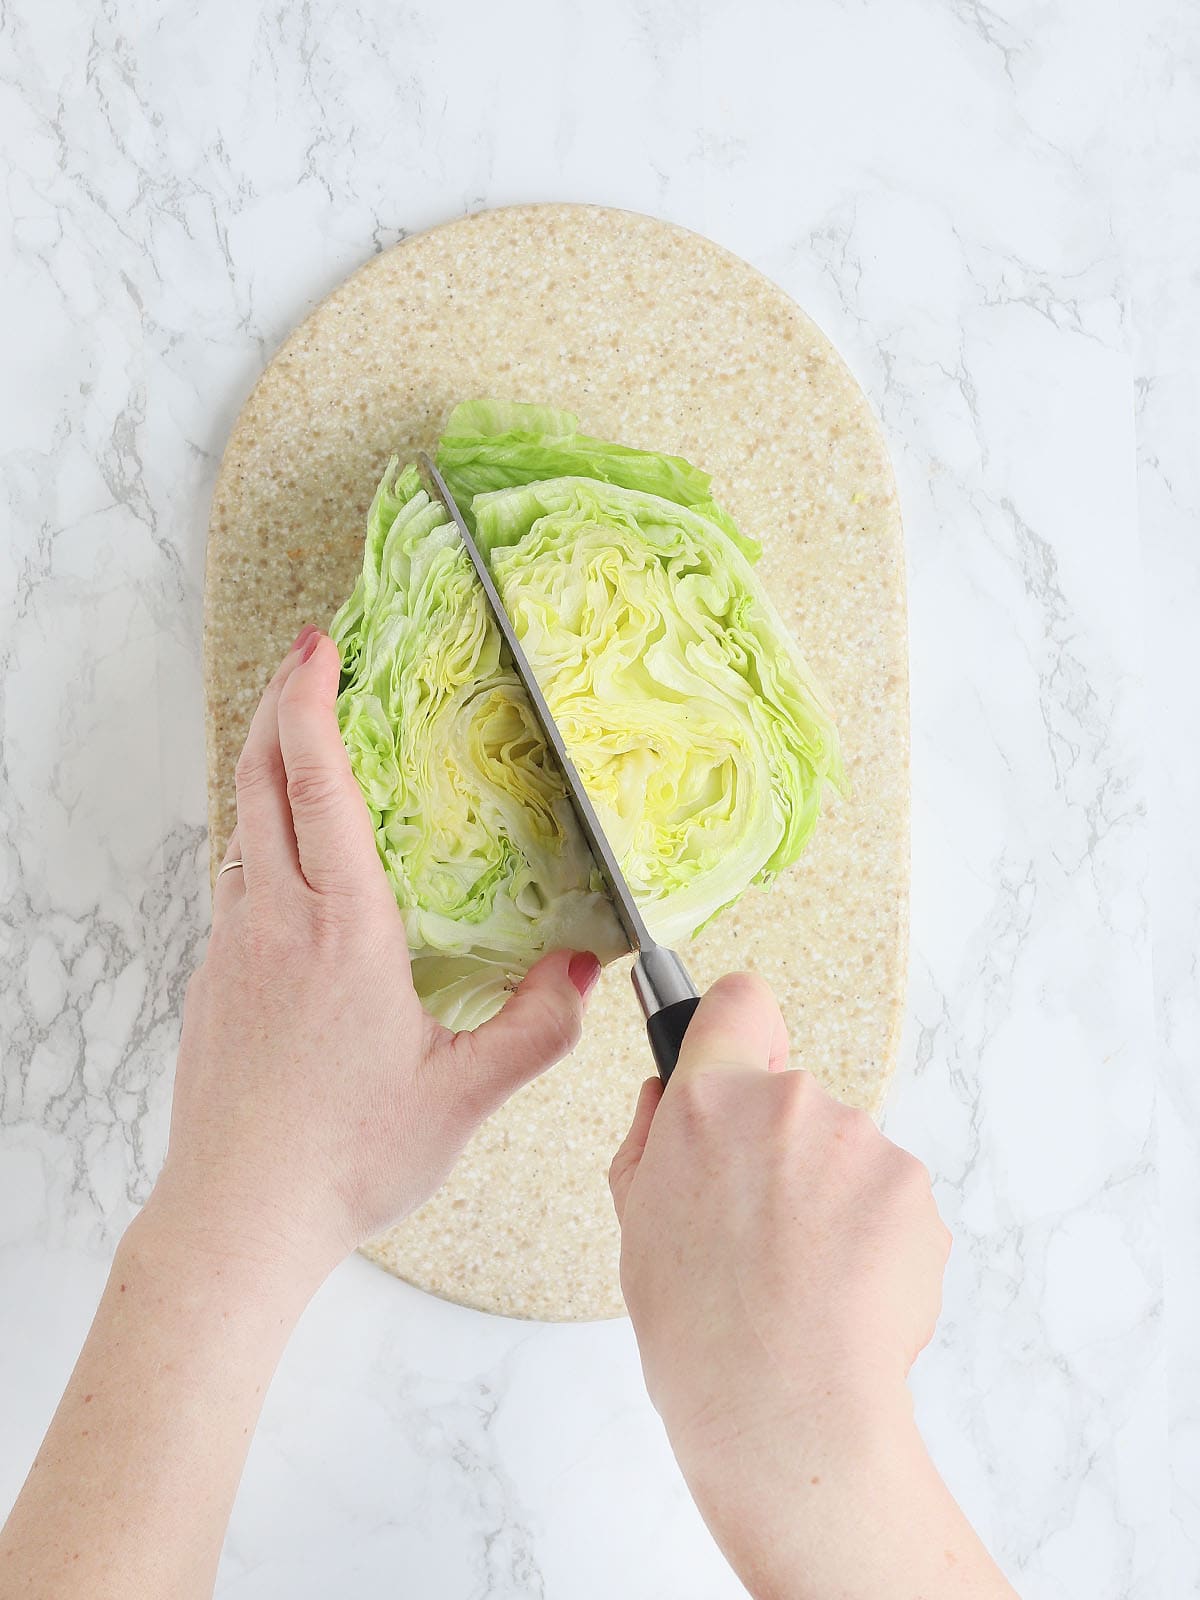 pair of hands using a sharp knife to cut a head of iceberg lettuce into quarters